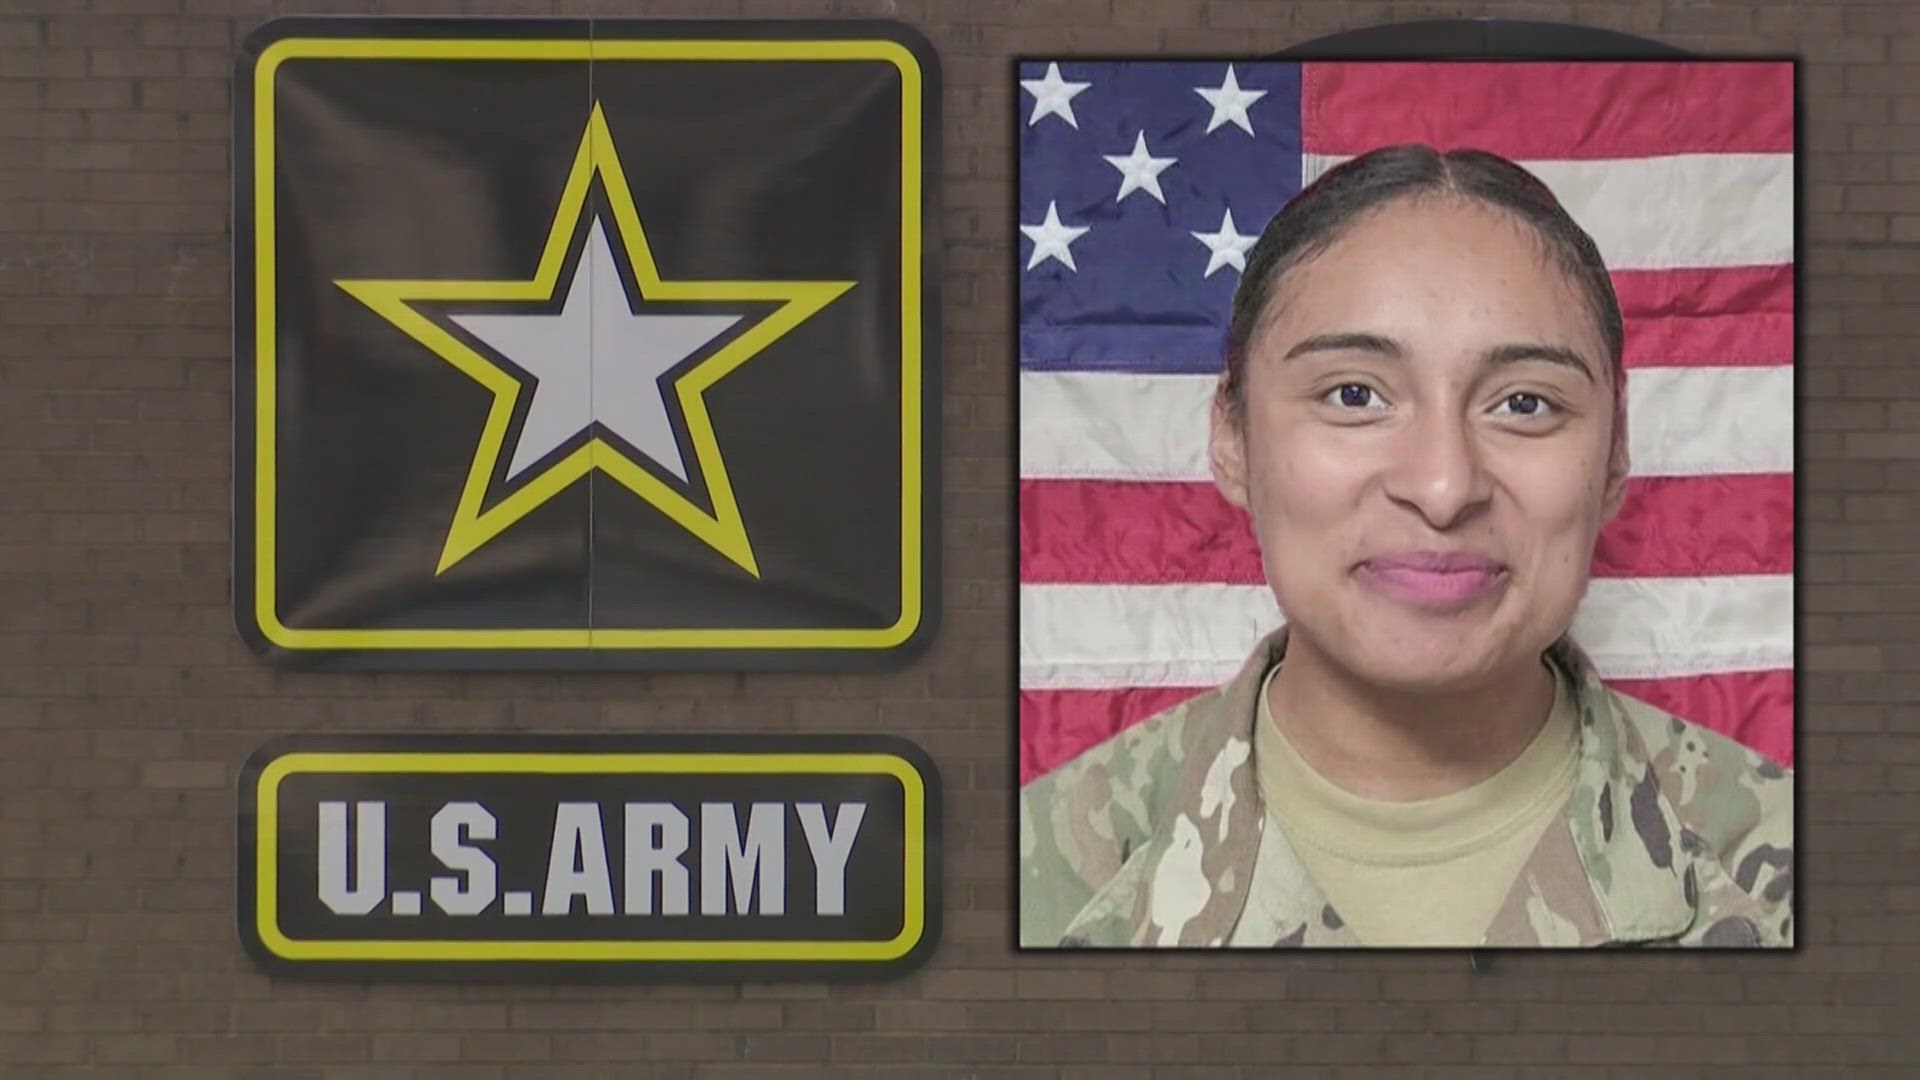 The soldier, 23-year-old Katia Duenas-Aguilar of Mesquite was found murdered inside a home near the Kentucky-Tennessee border.